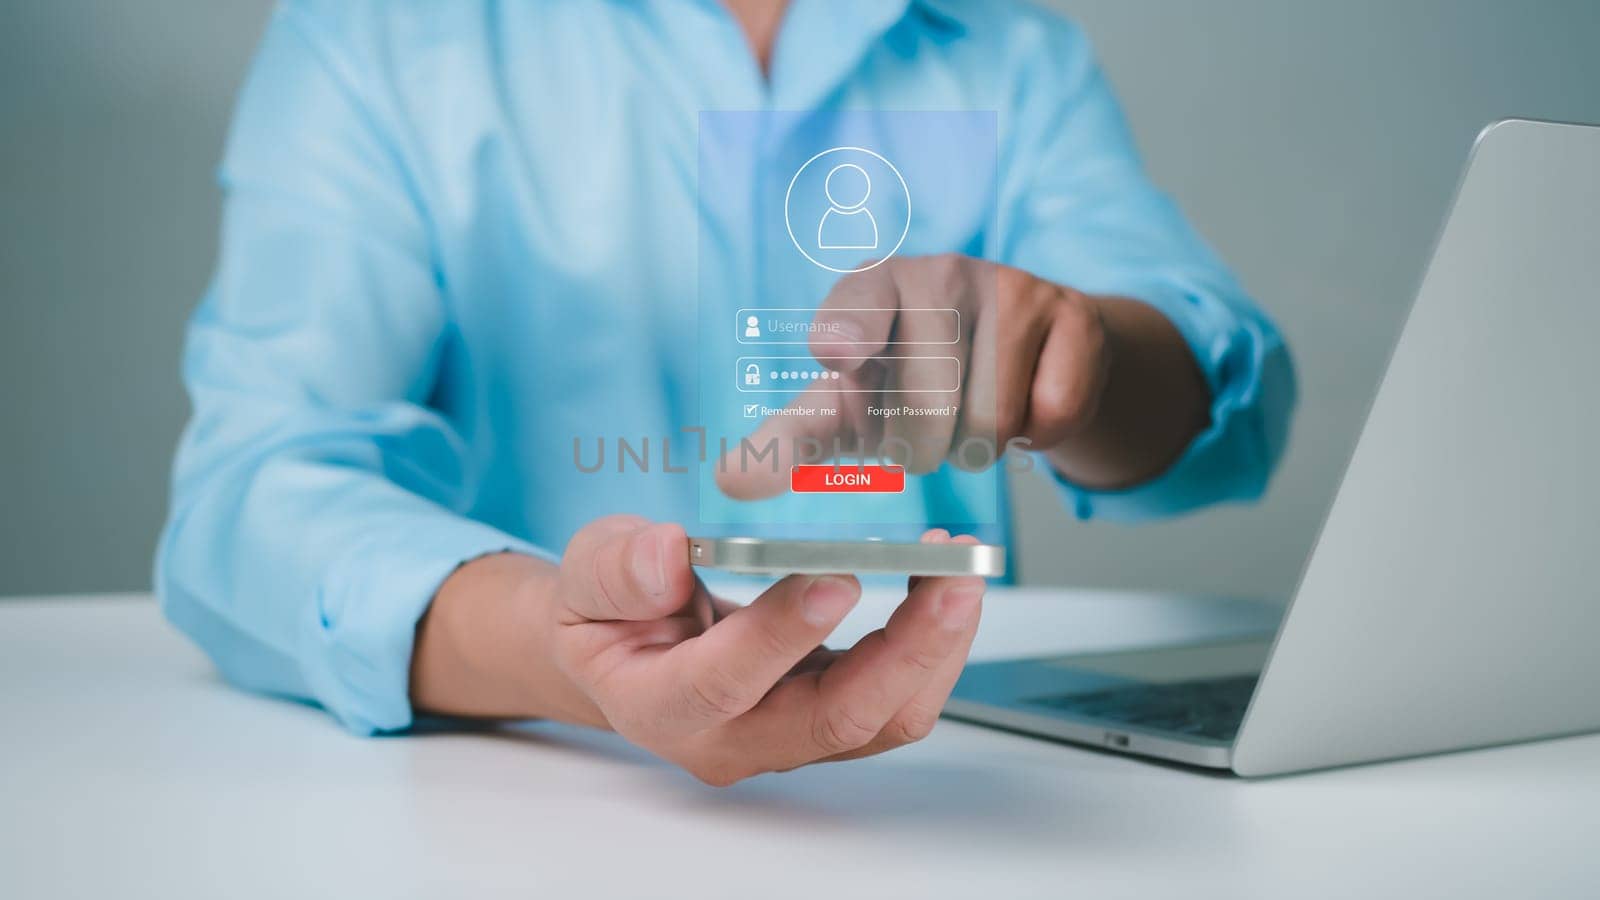 Cyber security and password login concept, Businessman uses smartphone and entering username and password of data network, Online data protection concept by Unimages2527